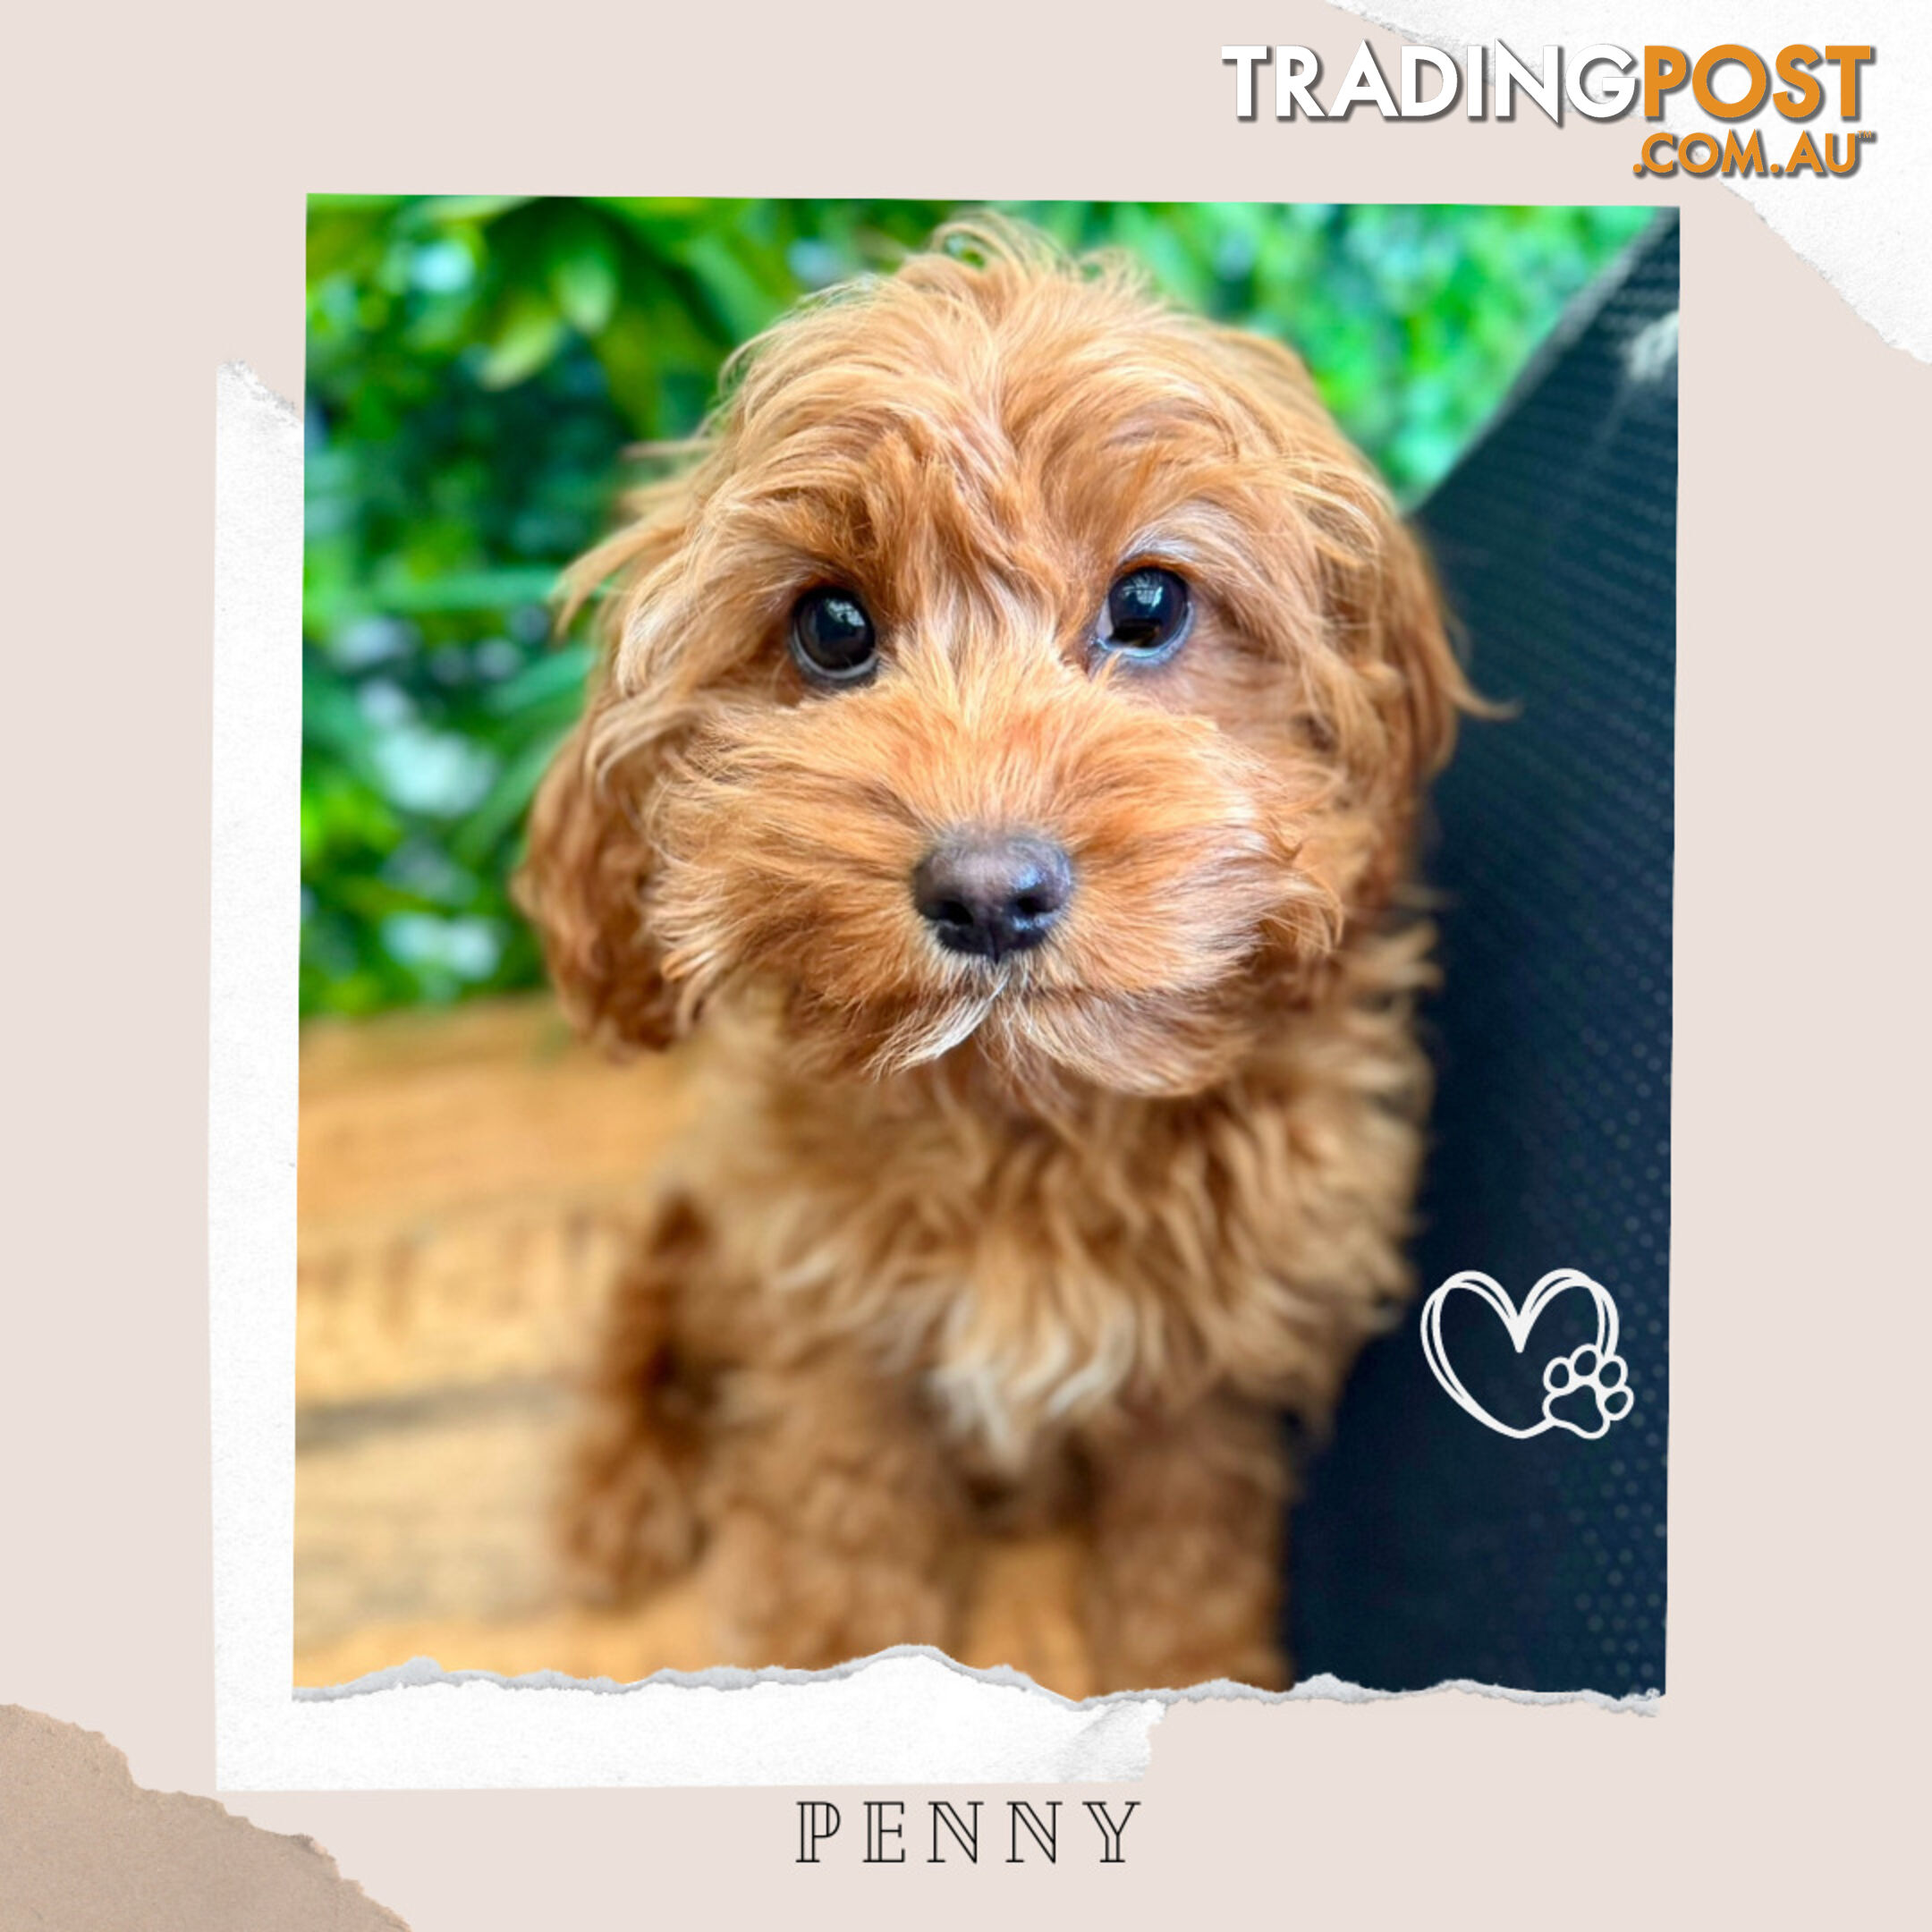 1st Gen Toy Cavoodle Pups DNA Clear, Toilet Trained, Health Guarantee, Available Now. Dandenong Vic